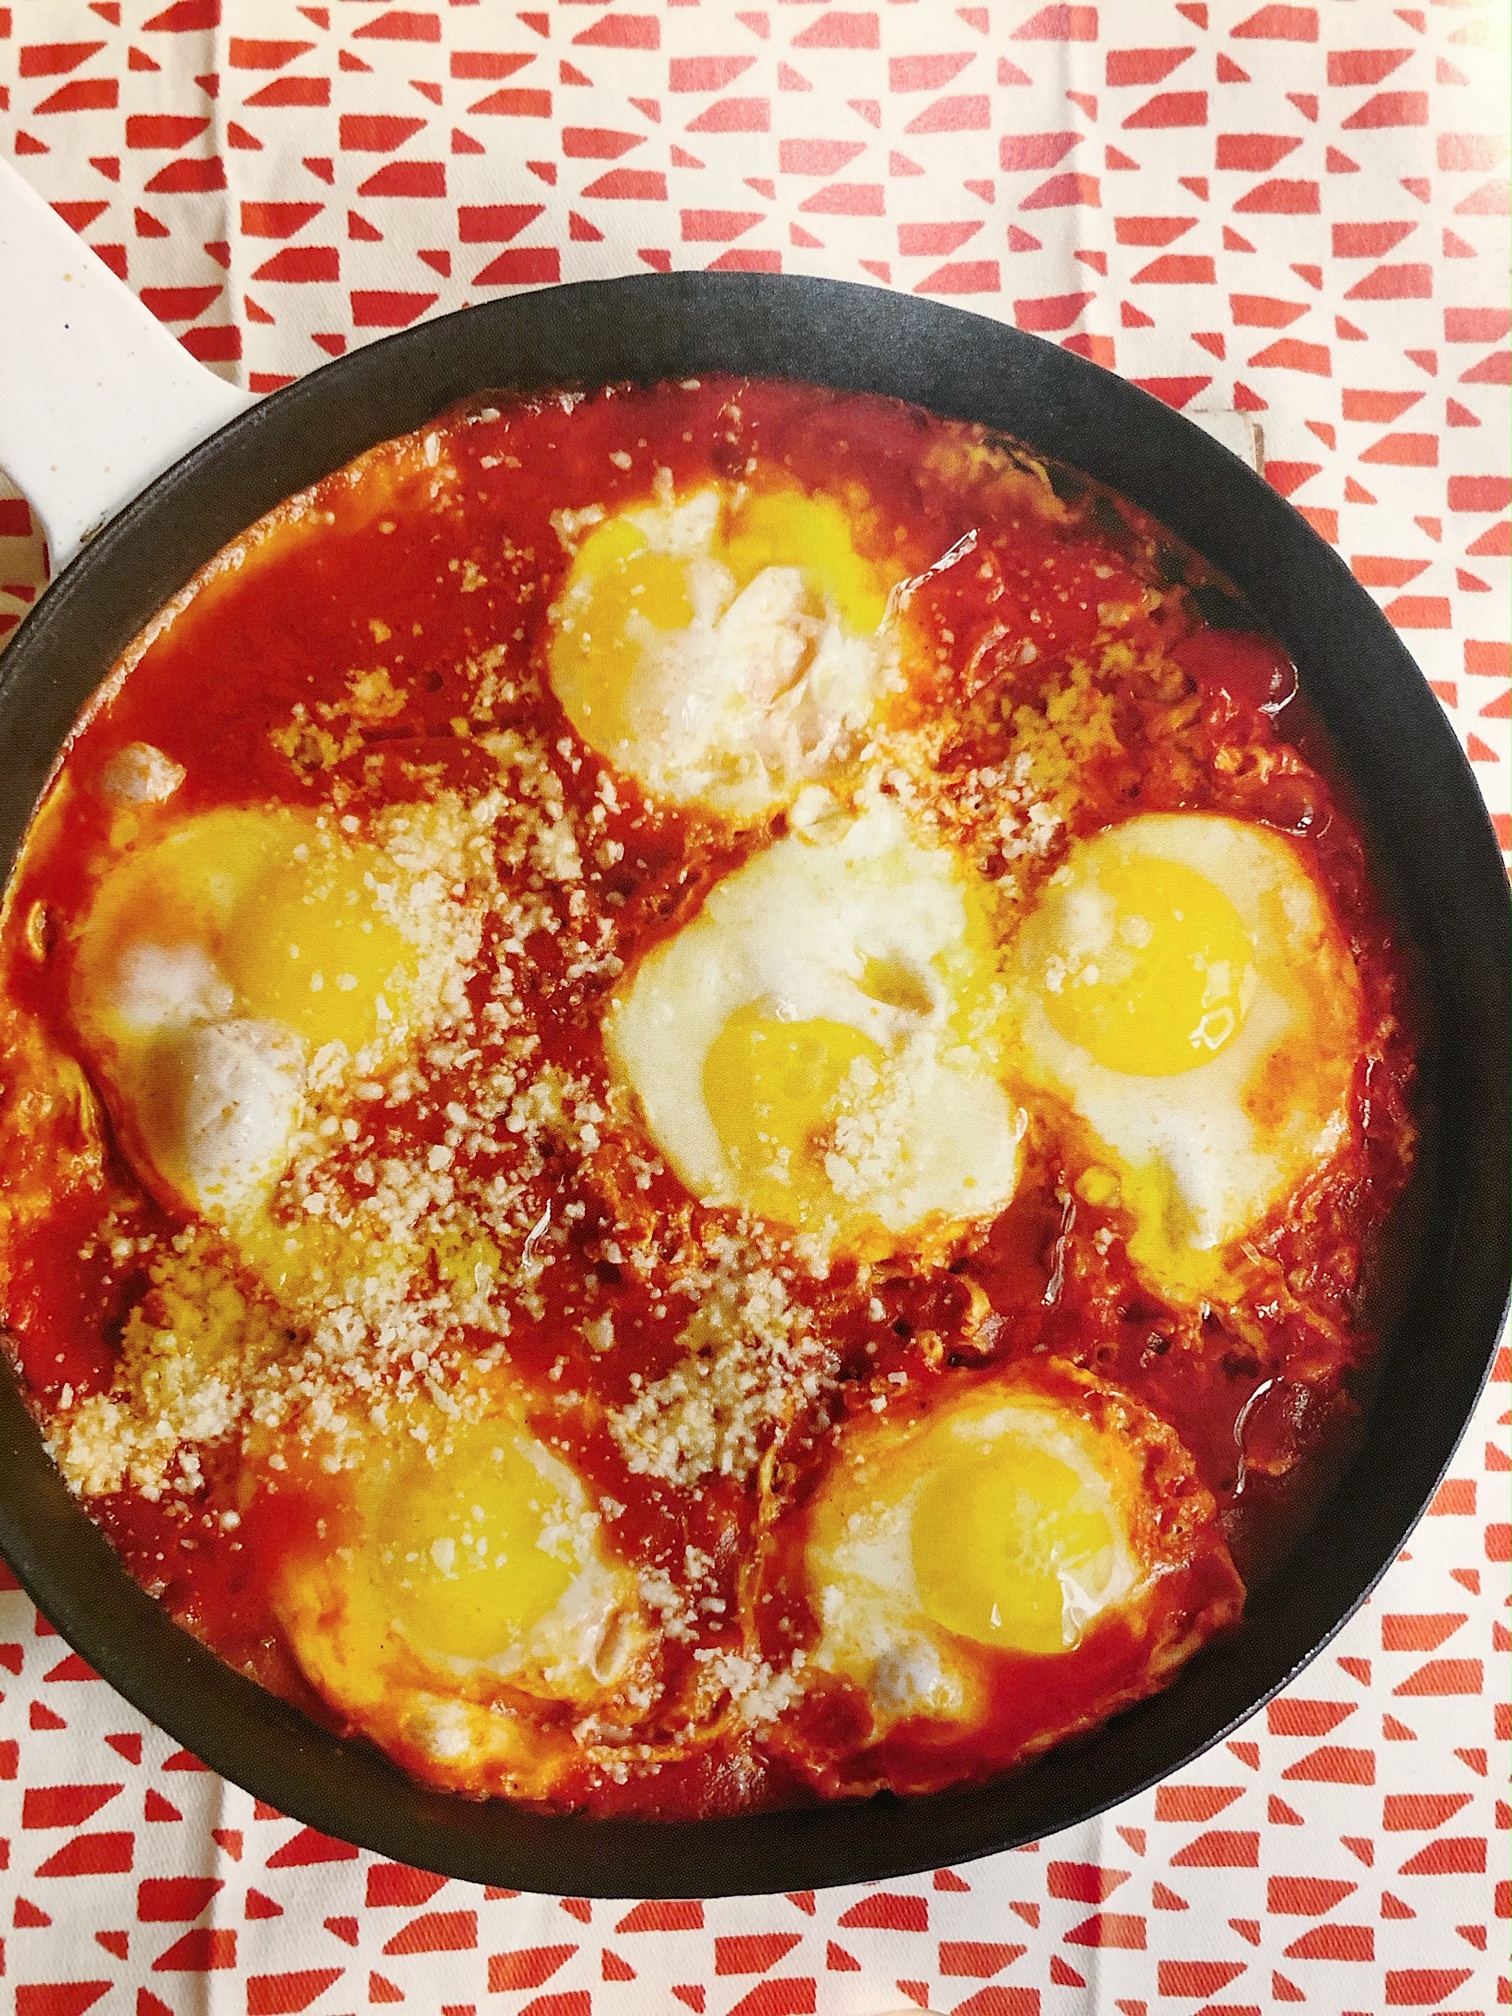 Sunny-side up eggs in tomato sauce in a skillet